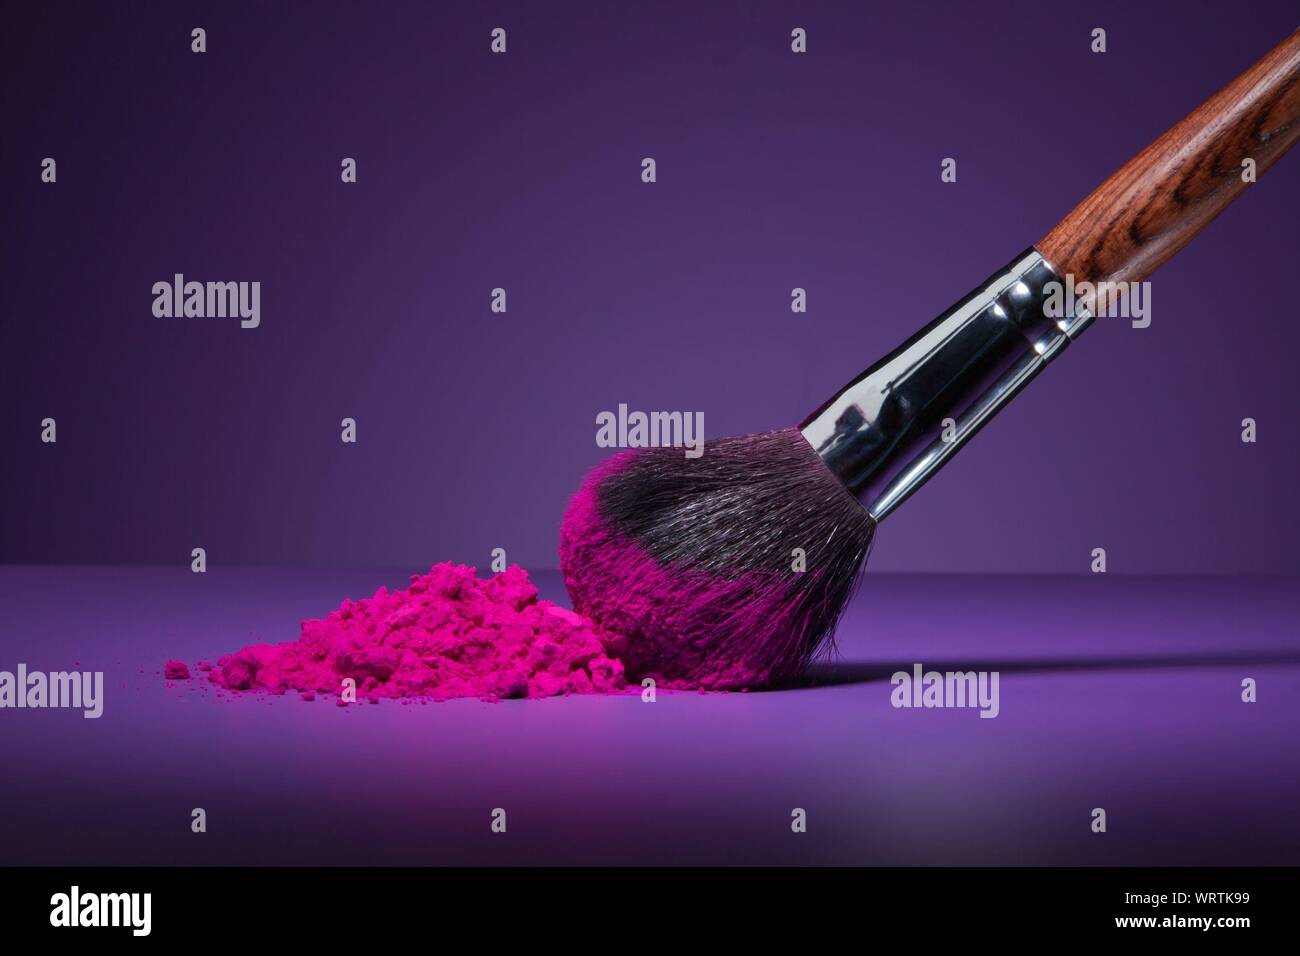 Close-up Of Make-up Brush And Pink Face Powder On Purple Table Stock Photo